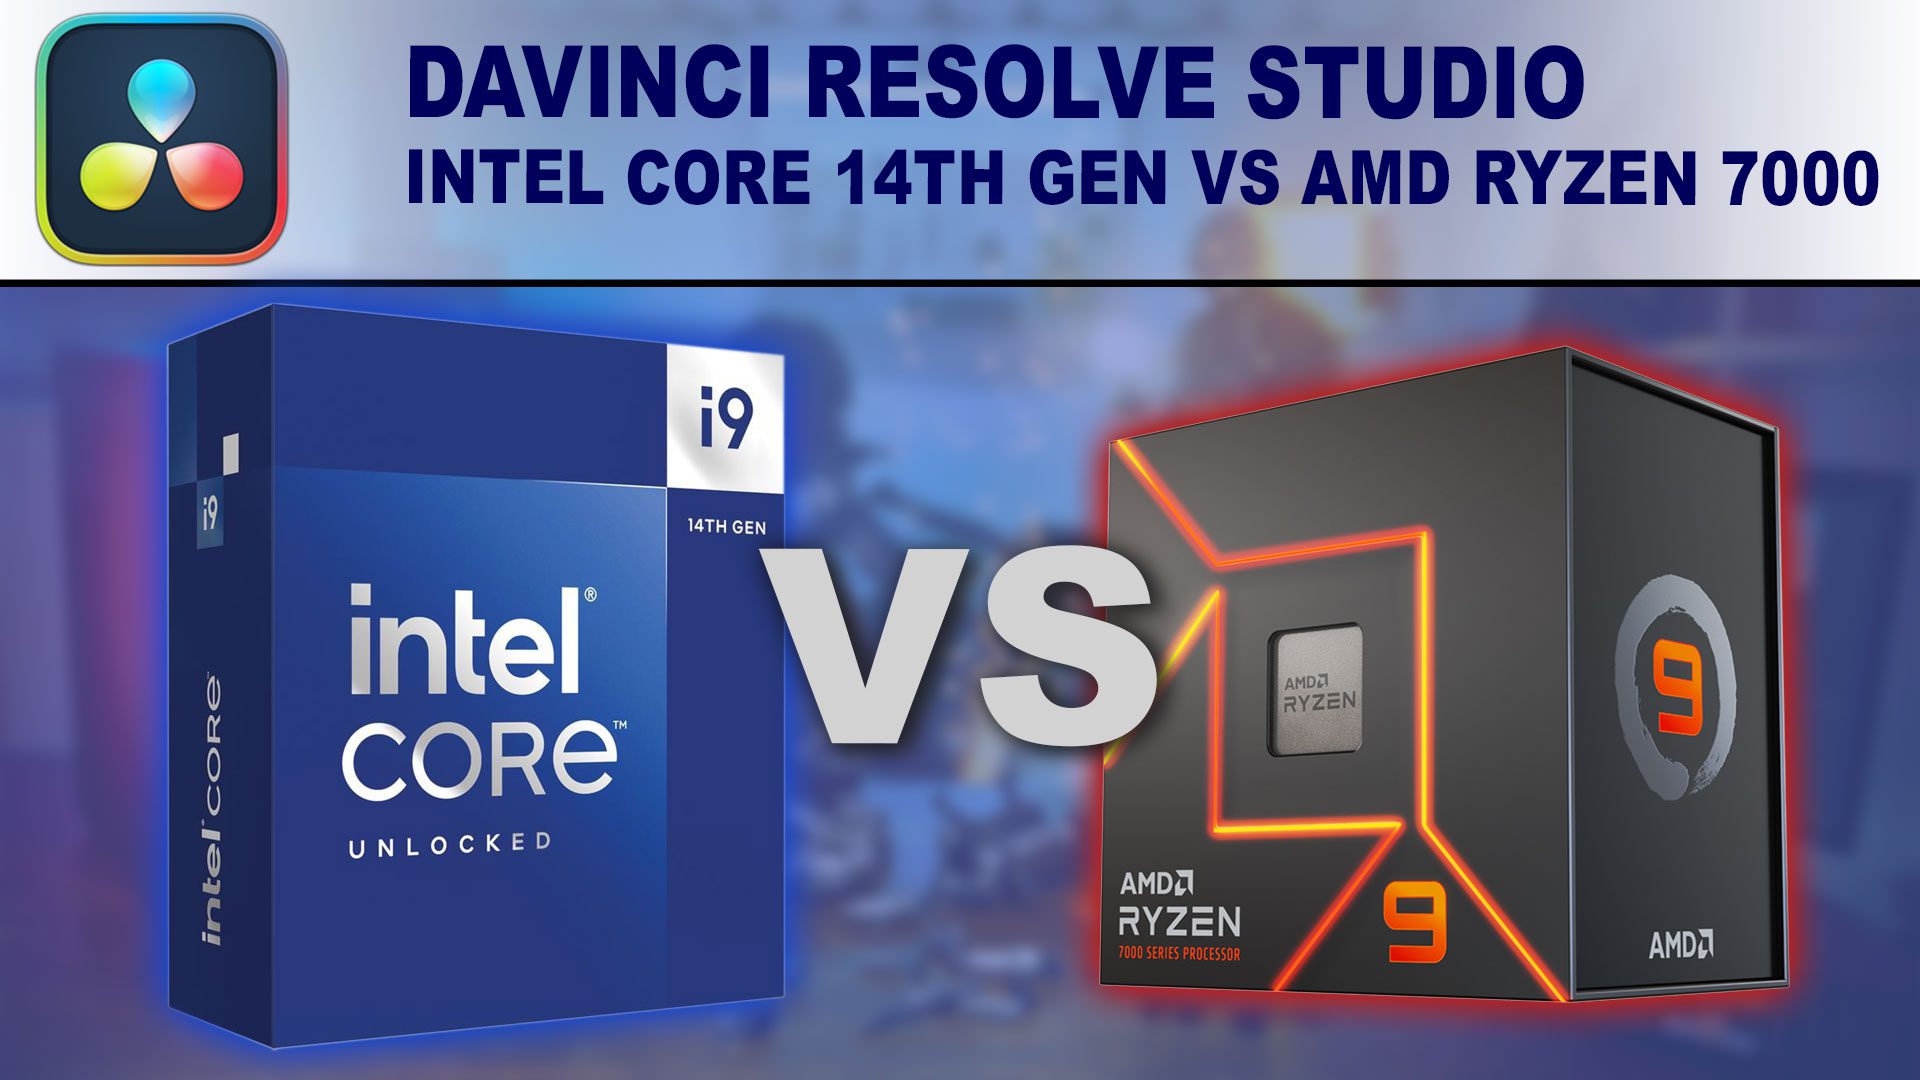 Decorative Image: Intel Core i9-14900K box and AMD Ryzen 9 7950X box on a blue background with the words "VS" between them and the title "DaVinci Resolve" above them.